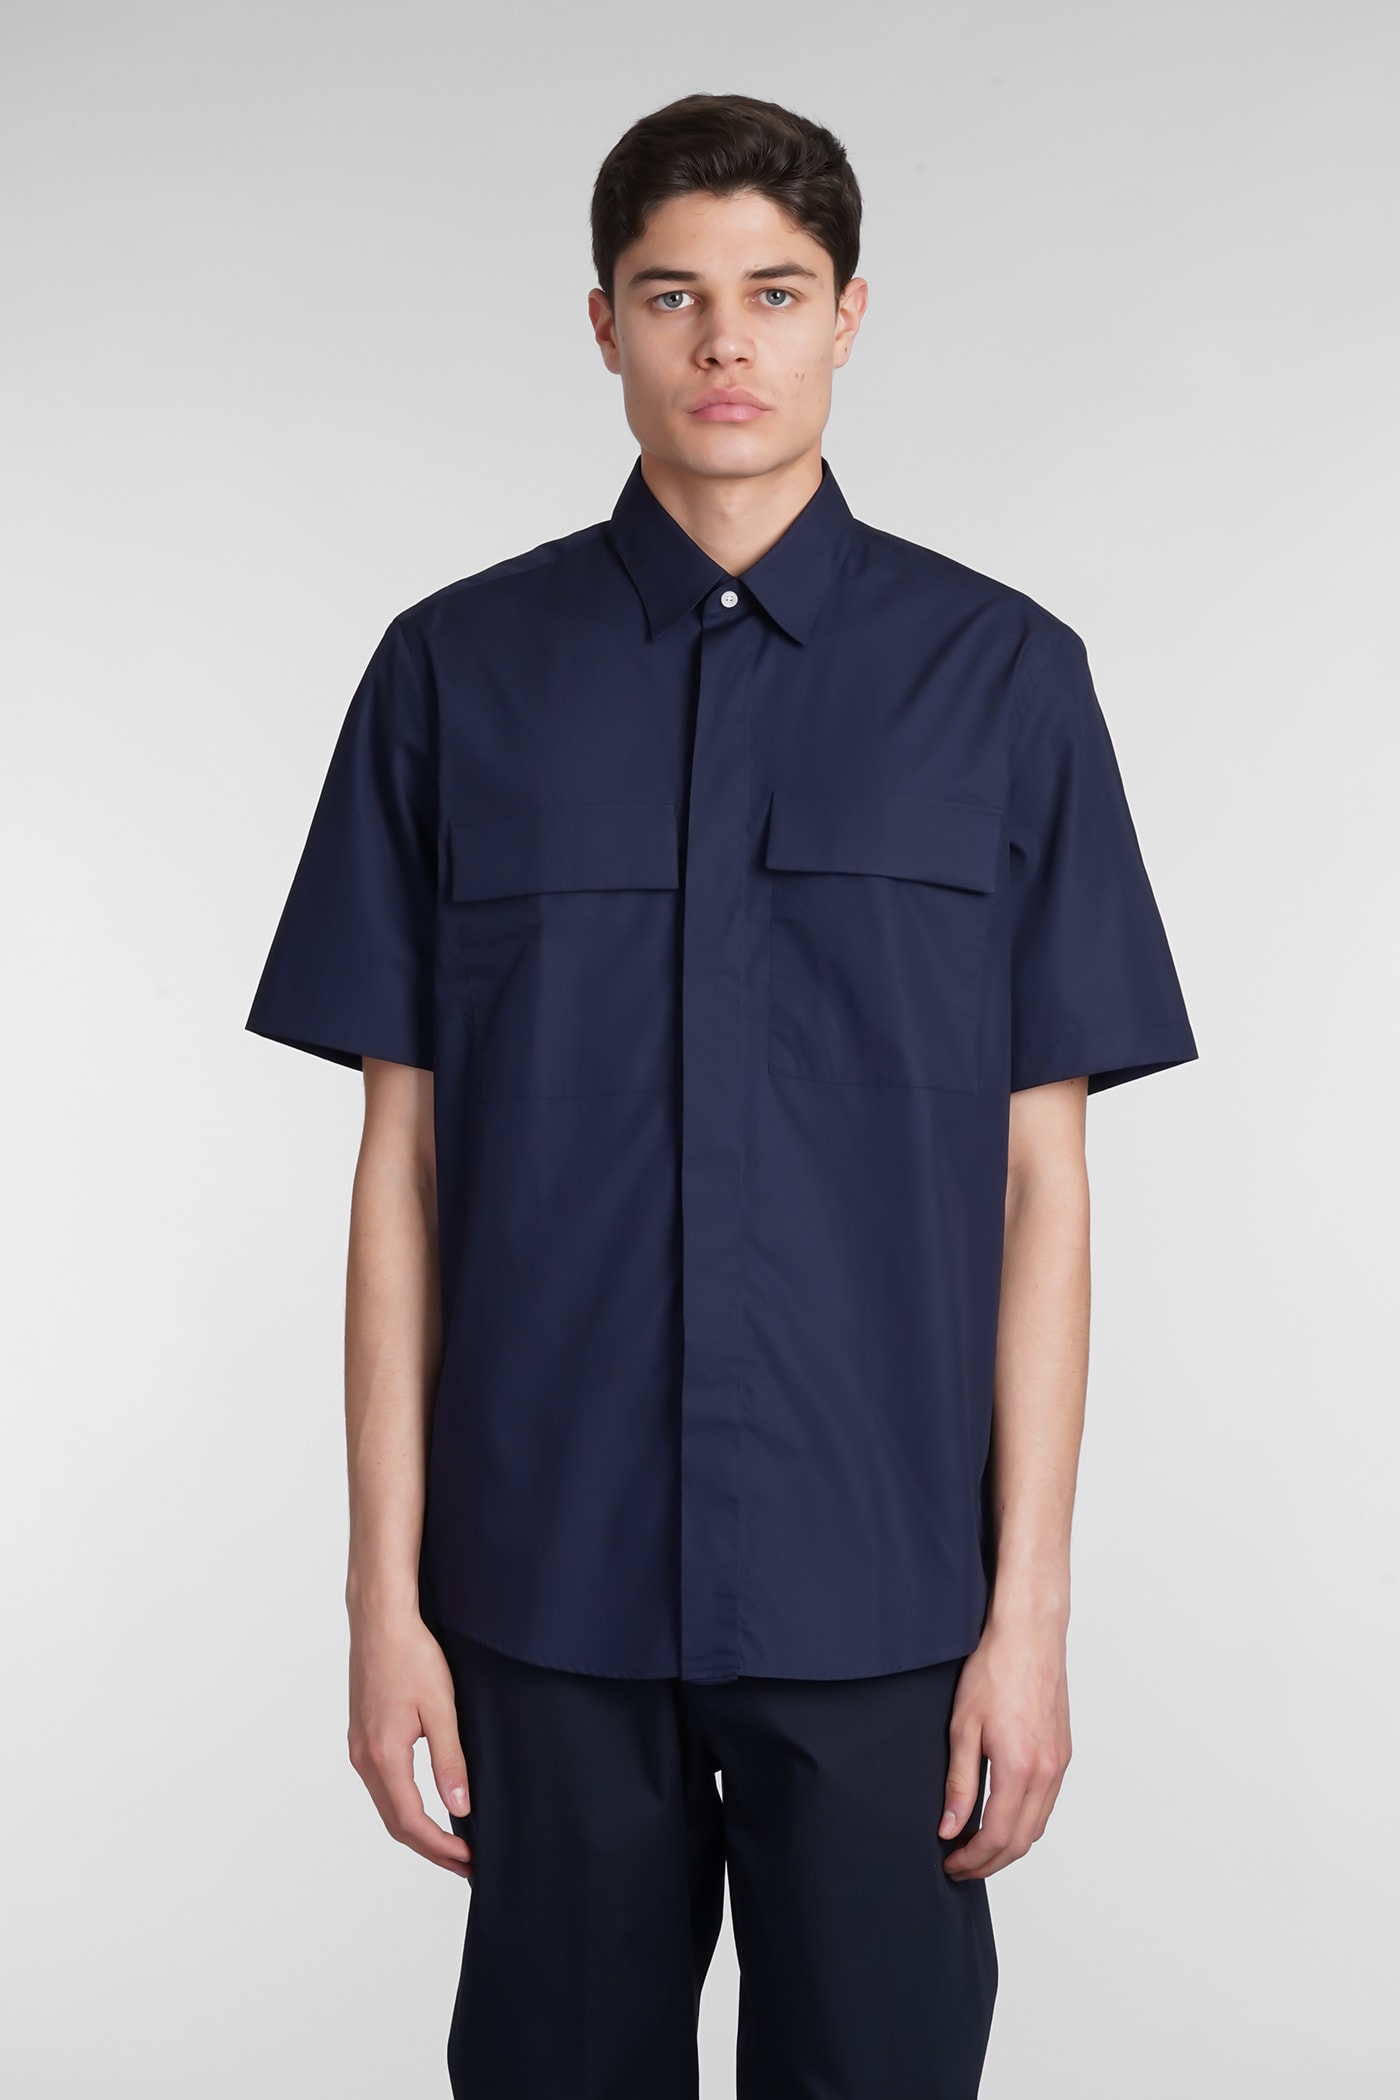 Low Brand Shirt In Blue Cotton